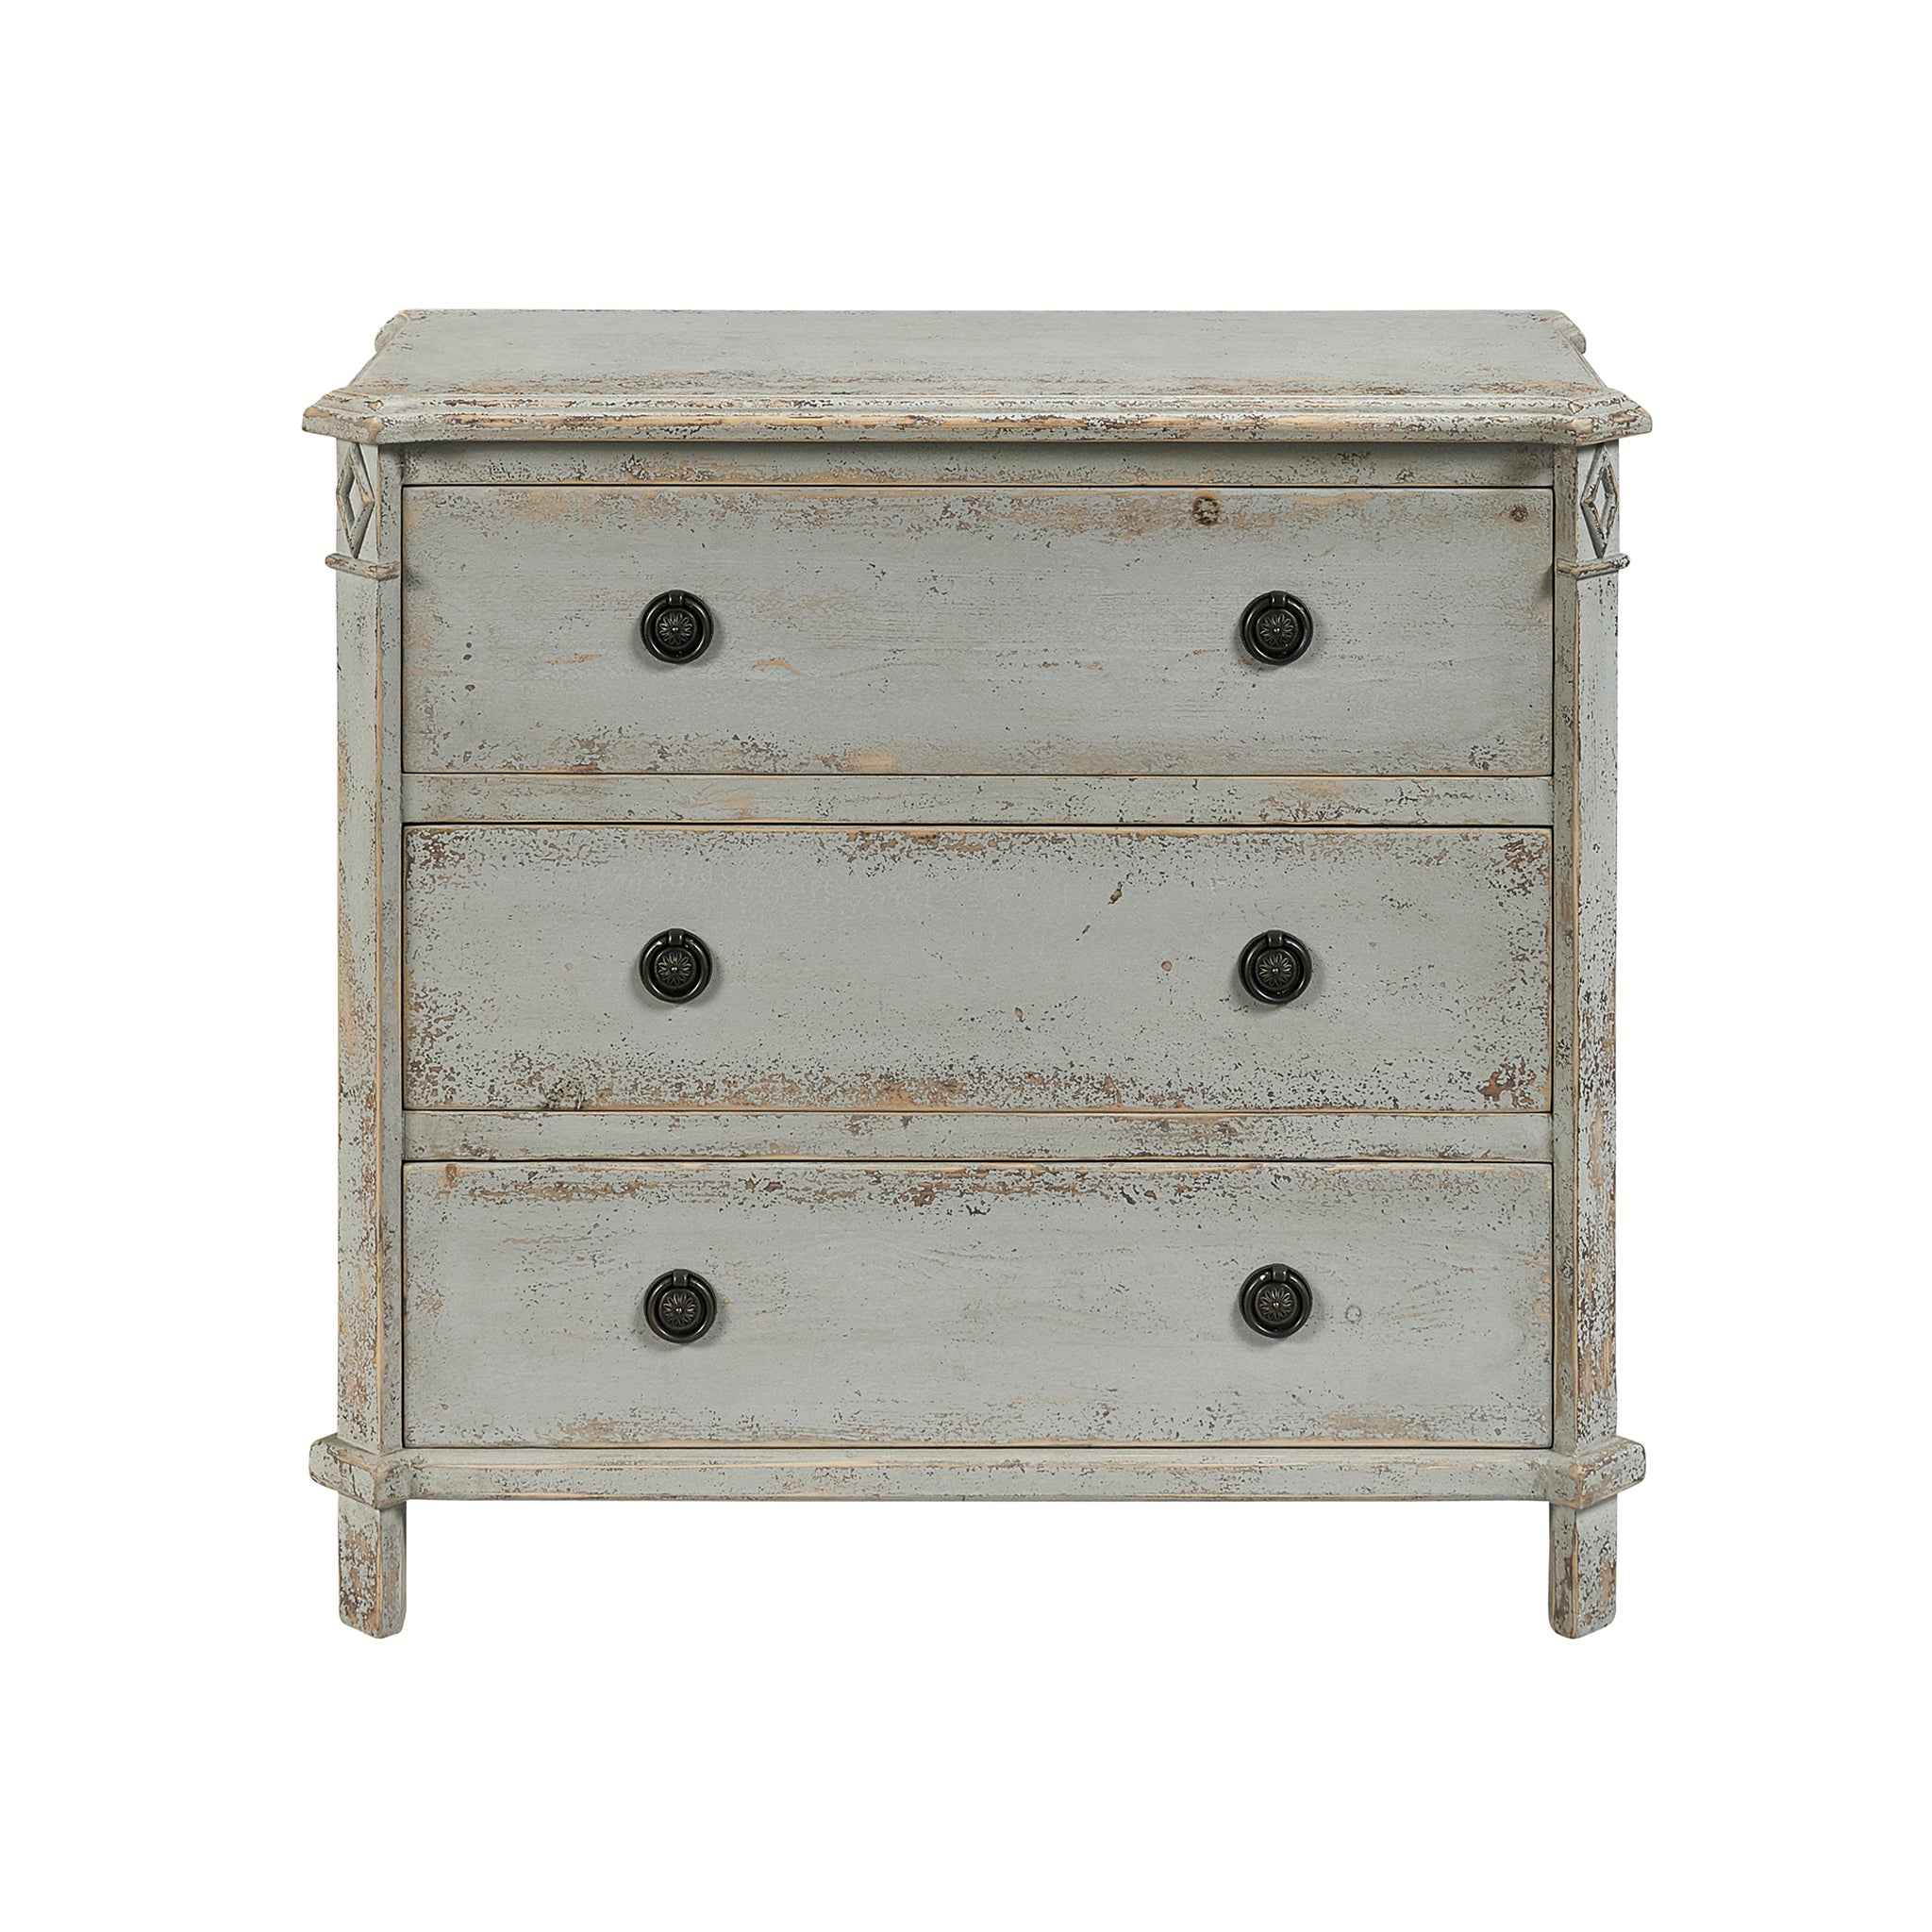 Front View of the Antique French Gray Linen Chest on a White Background